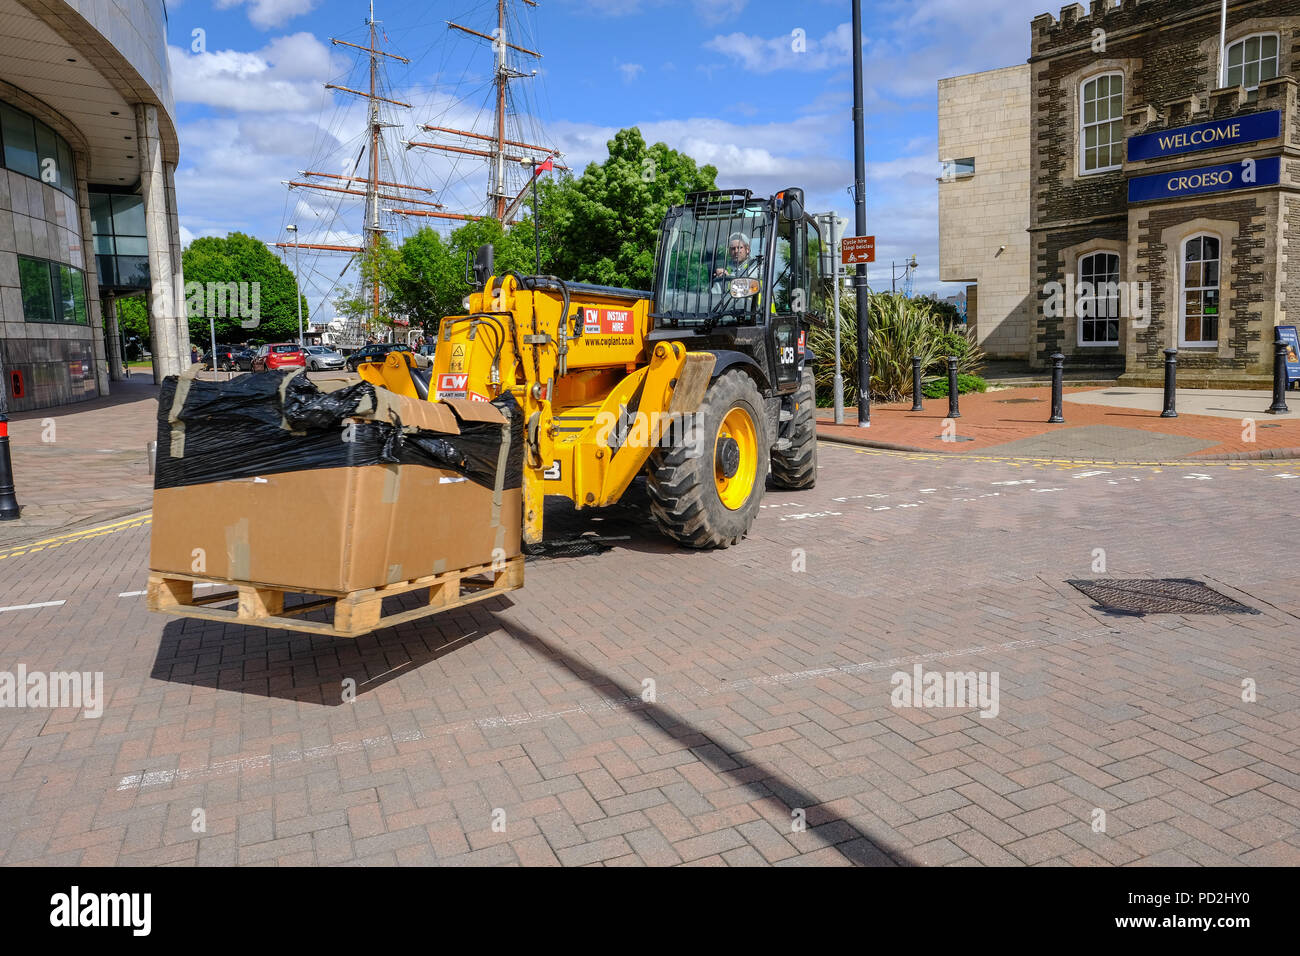 Cardiff Bay, Cardiff, Wales - May 20, 2017: Yellow JCB vehicle with a driver, moving a large cardboad covered box in a street near Cardiff Bay. Stock Photo